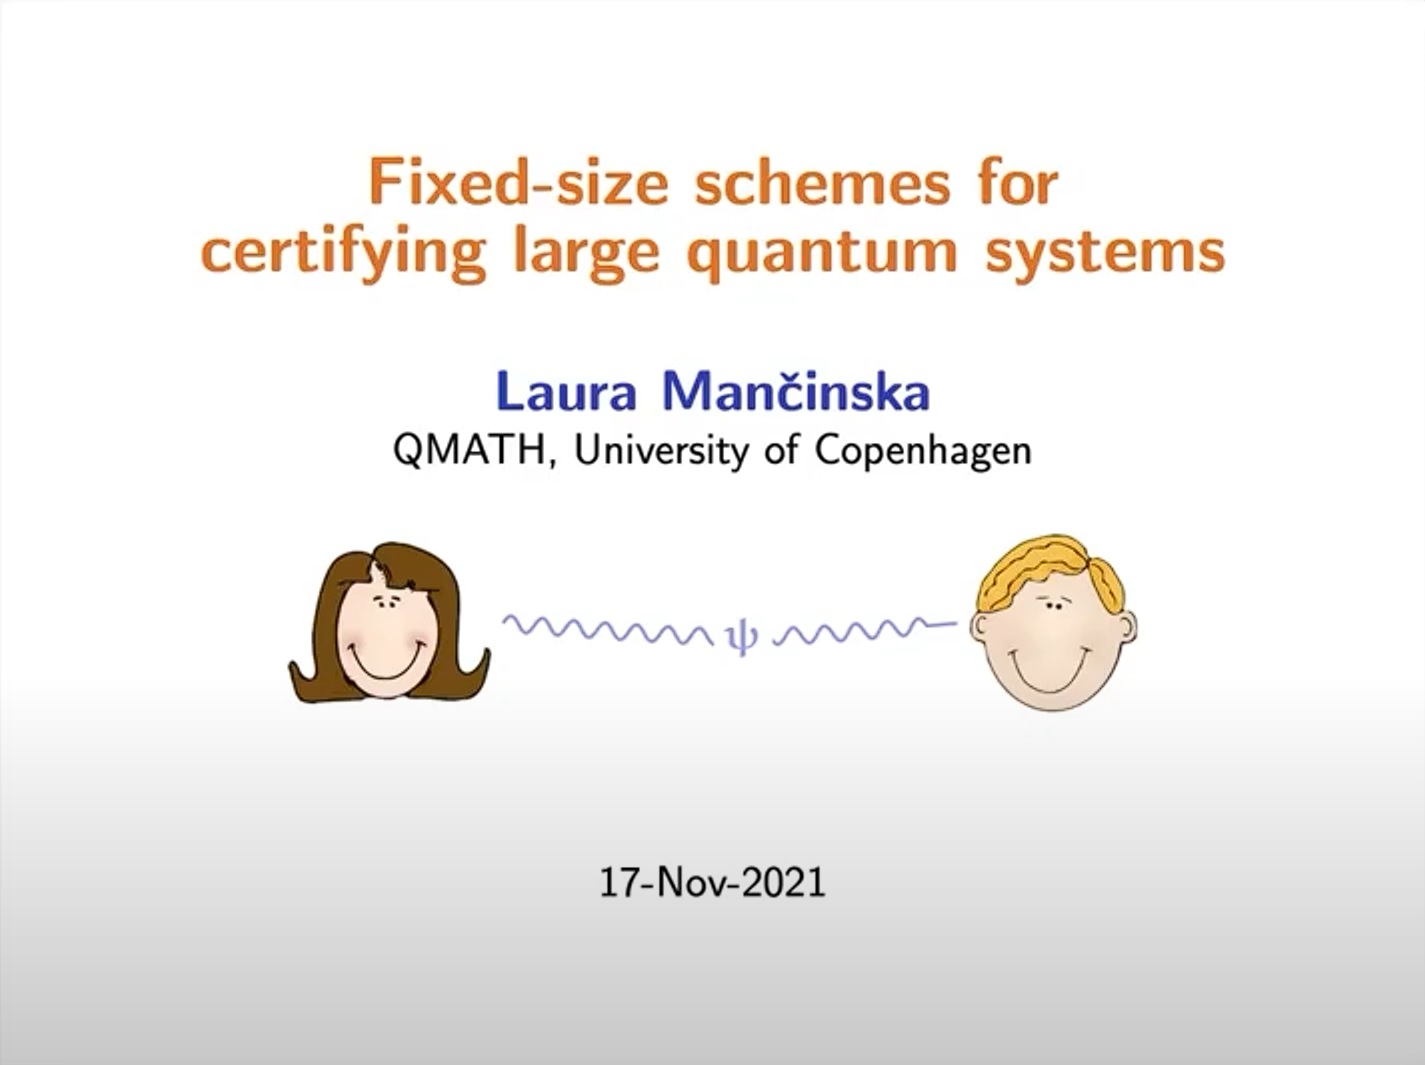 Laura Mancinska (QMATH, Copenhagen): Fixed-size schemes for certification of large quantum systems